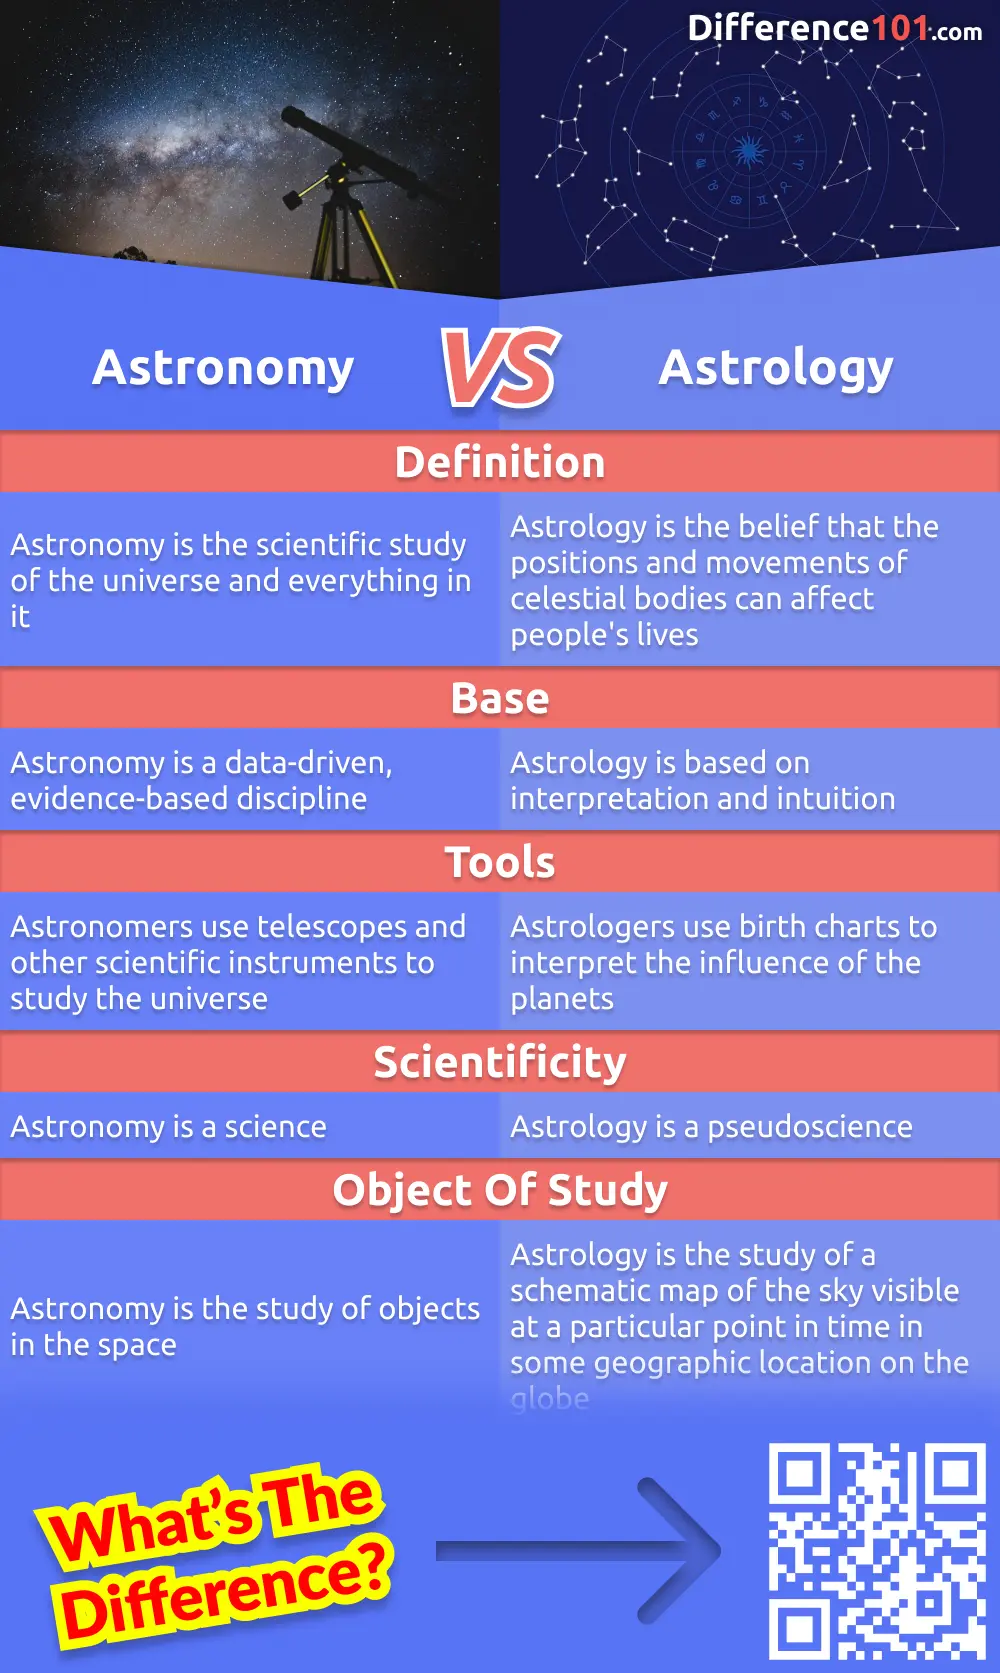 Are Astrology and Astronomy the Same Thing?